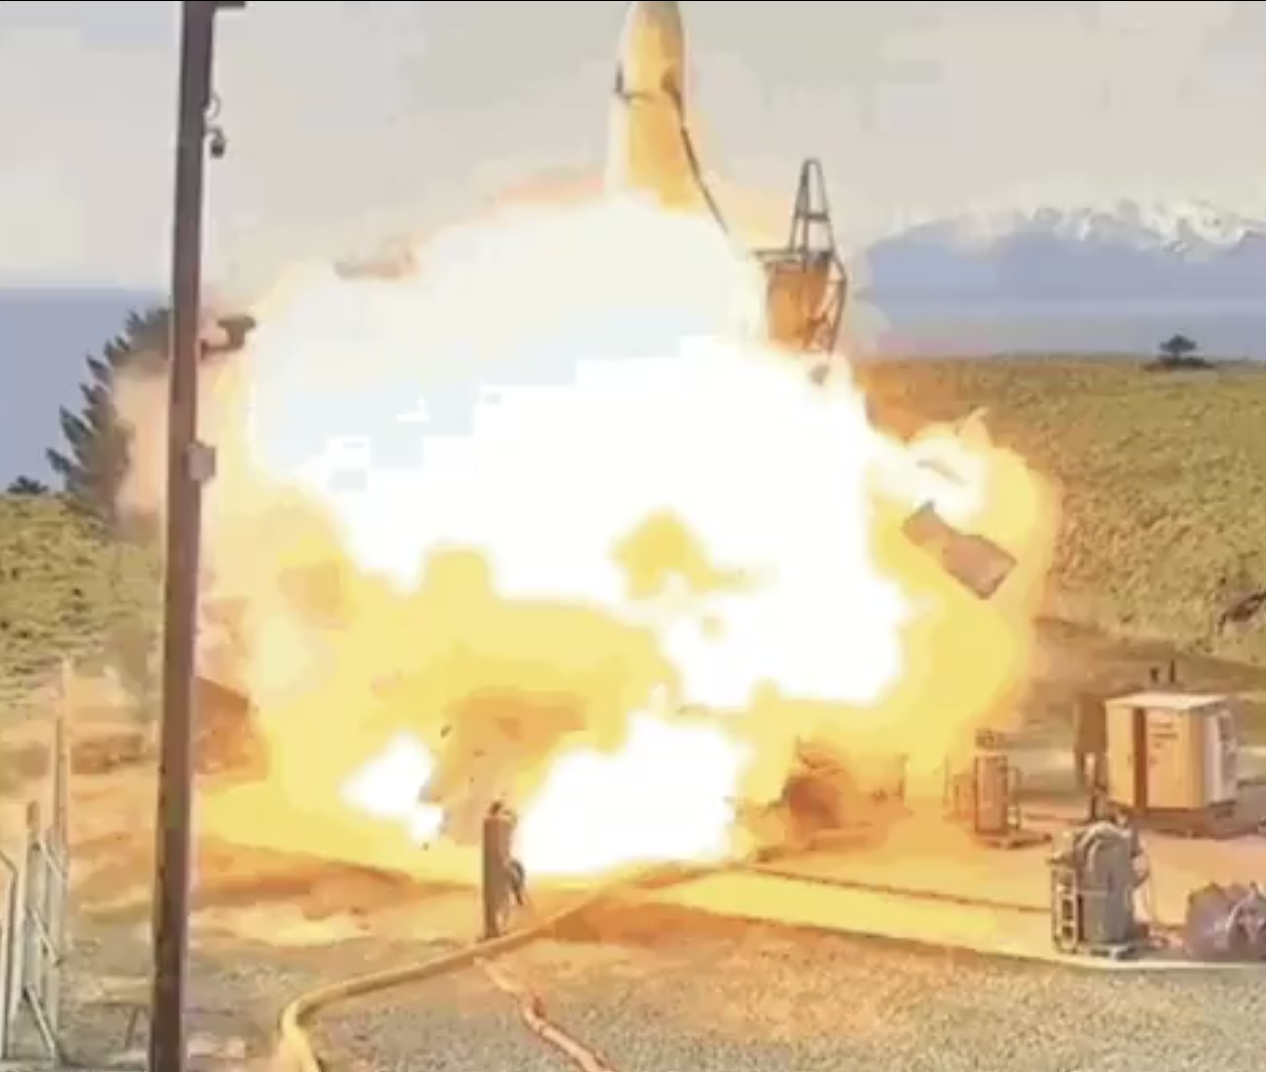 Astra's Rocket 3 vehicle exploding on its launchpad at the Pacific Spaceport Complex, in Alaska. ©Tech Crunch